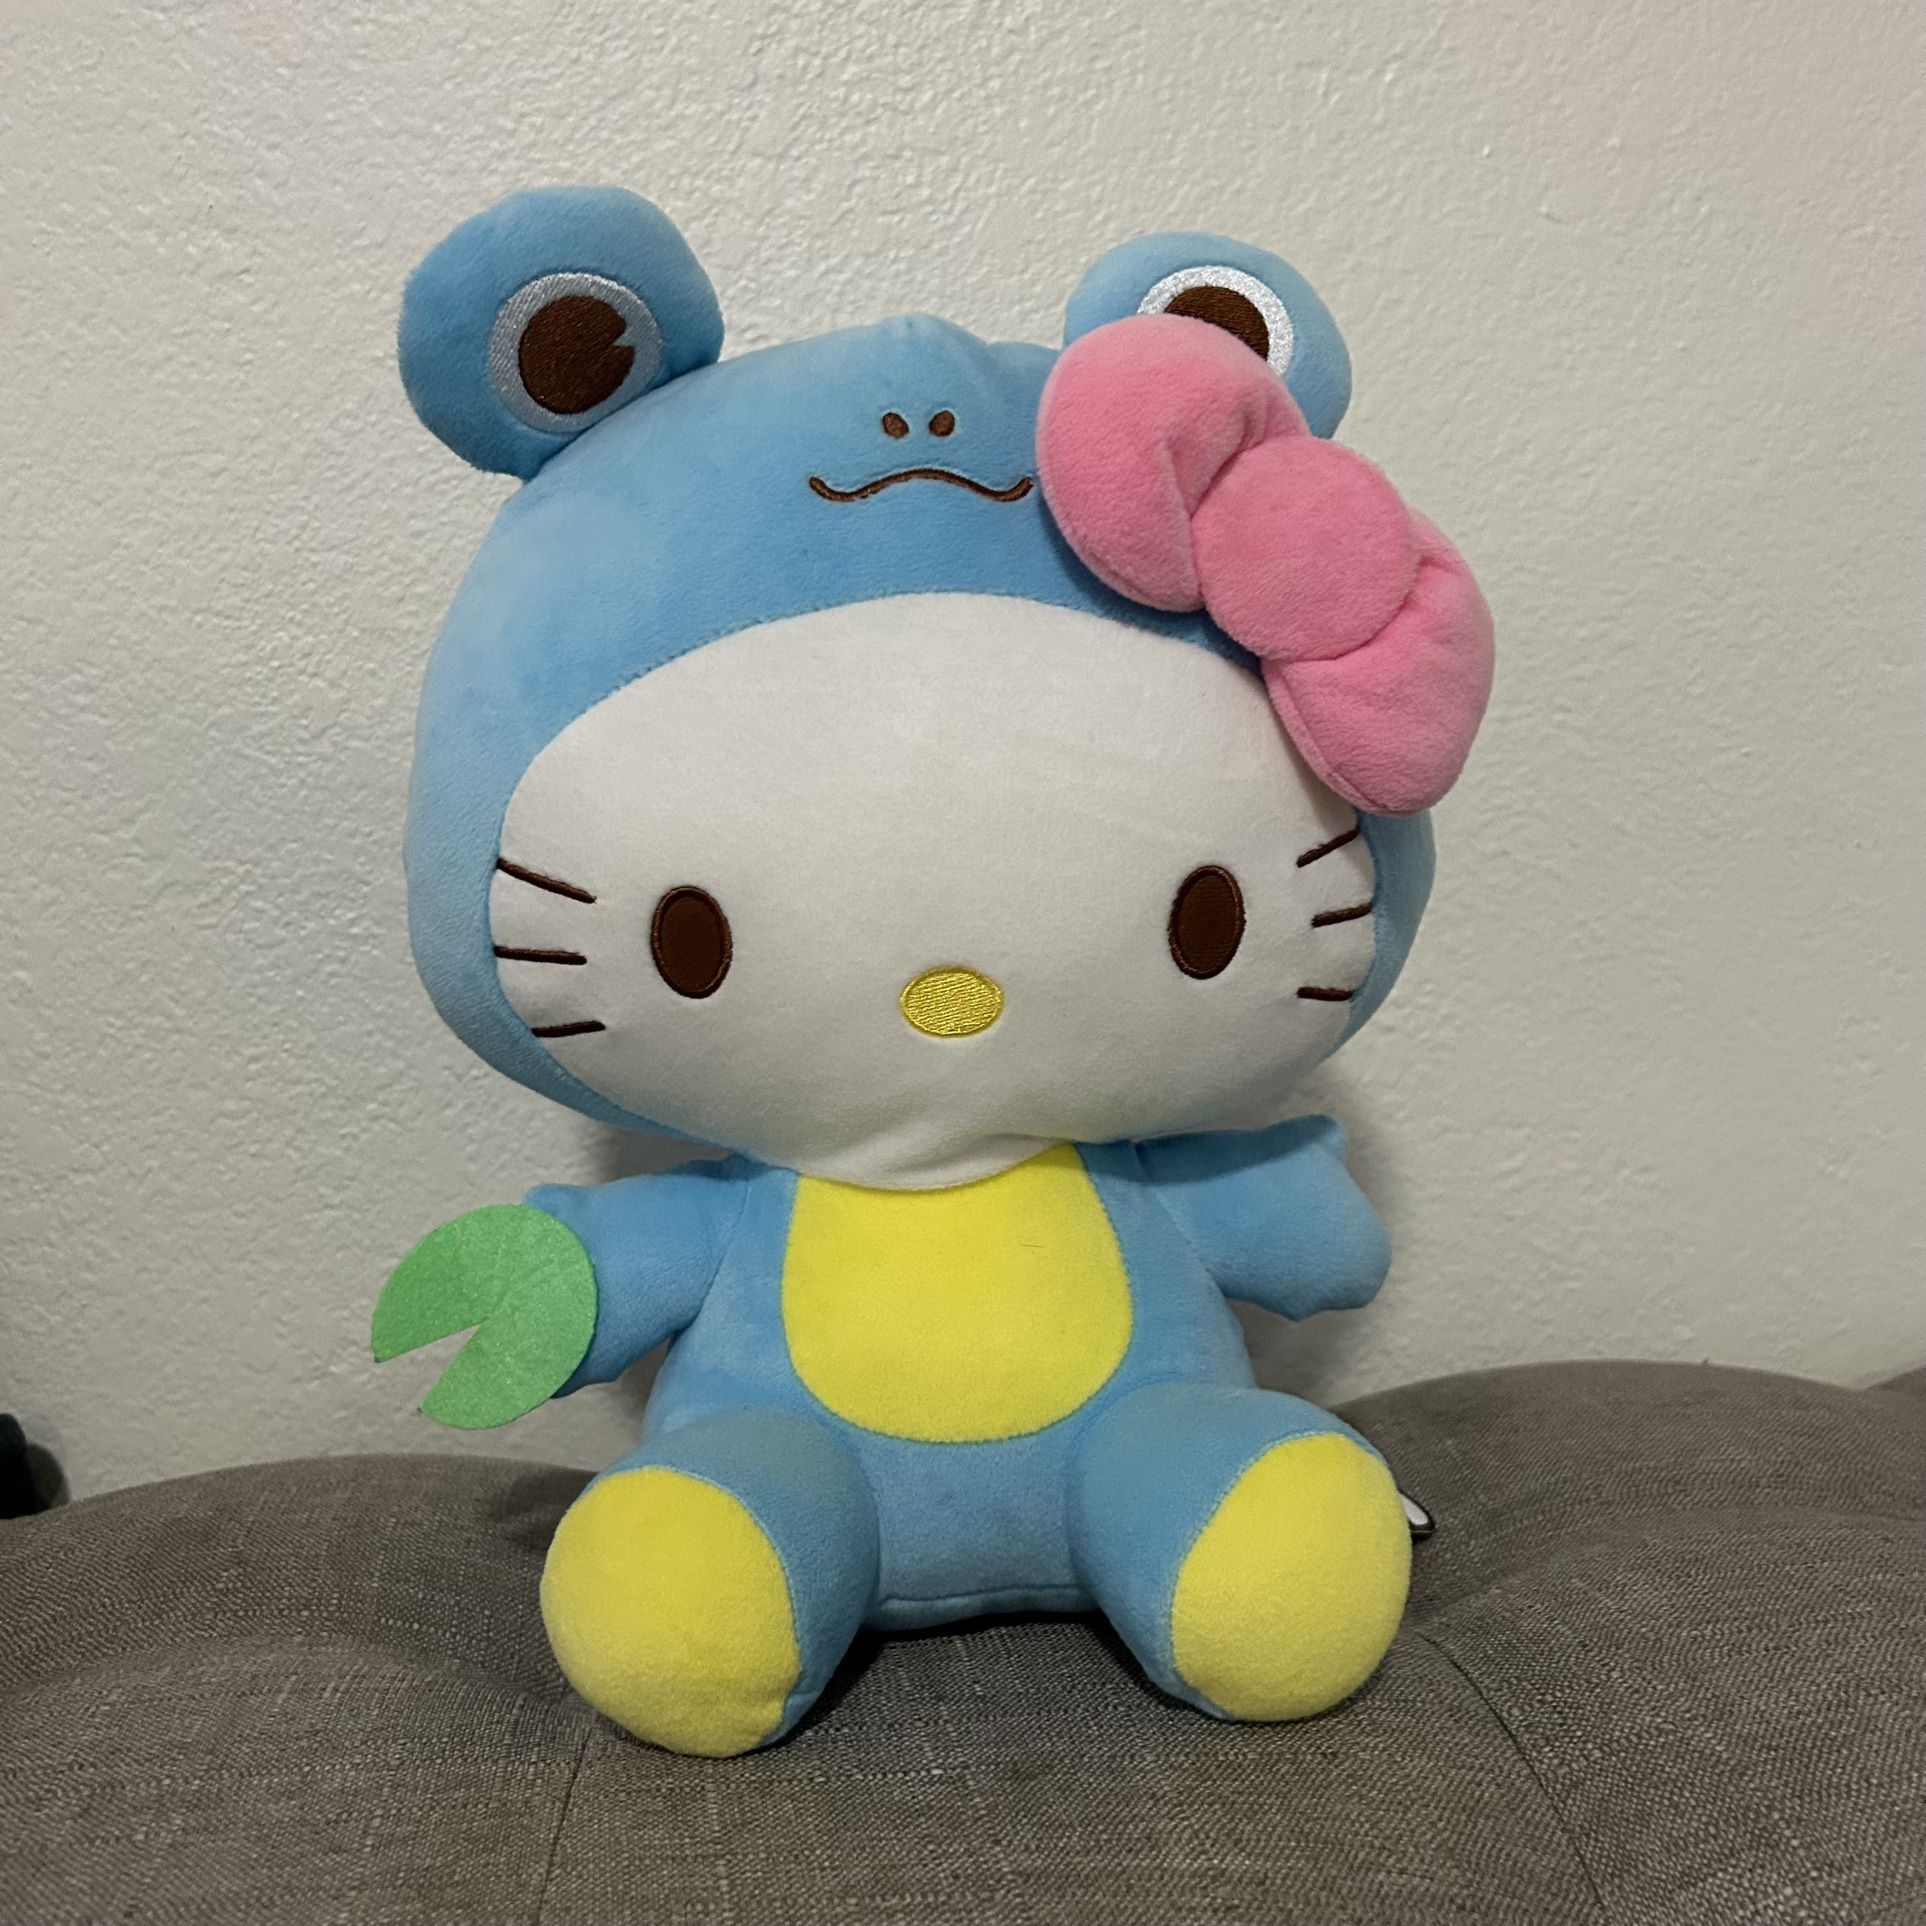 Blue Hello Kitty Frog Plushie for Sale in San Diego, CA - OfferUp